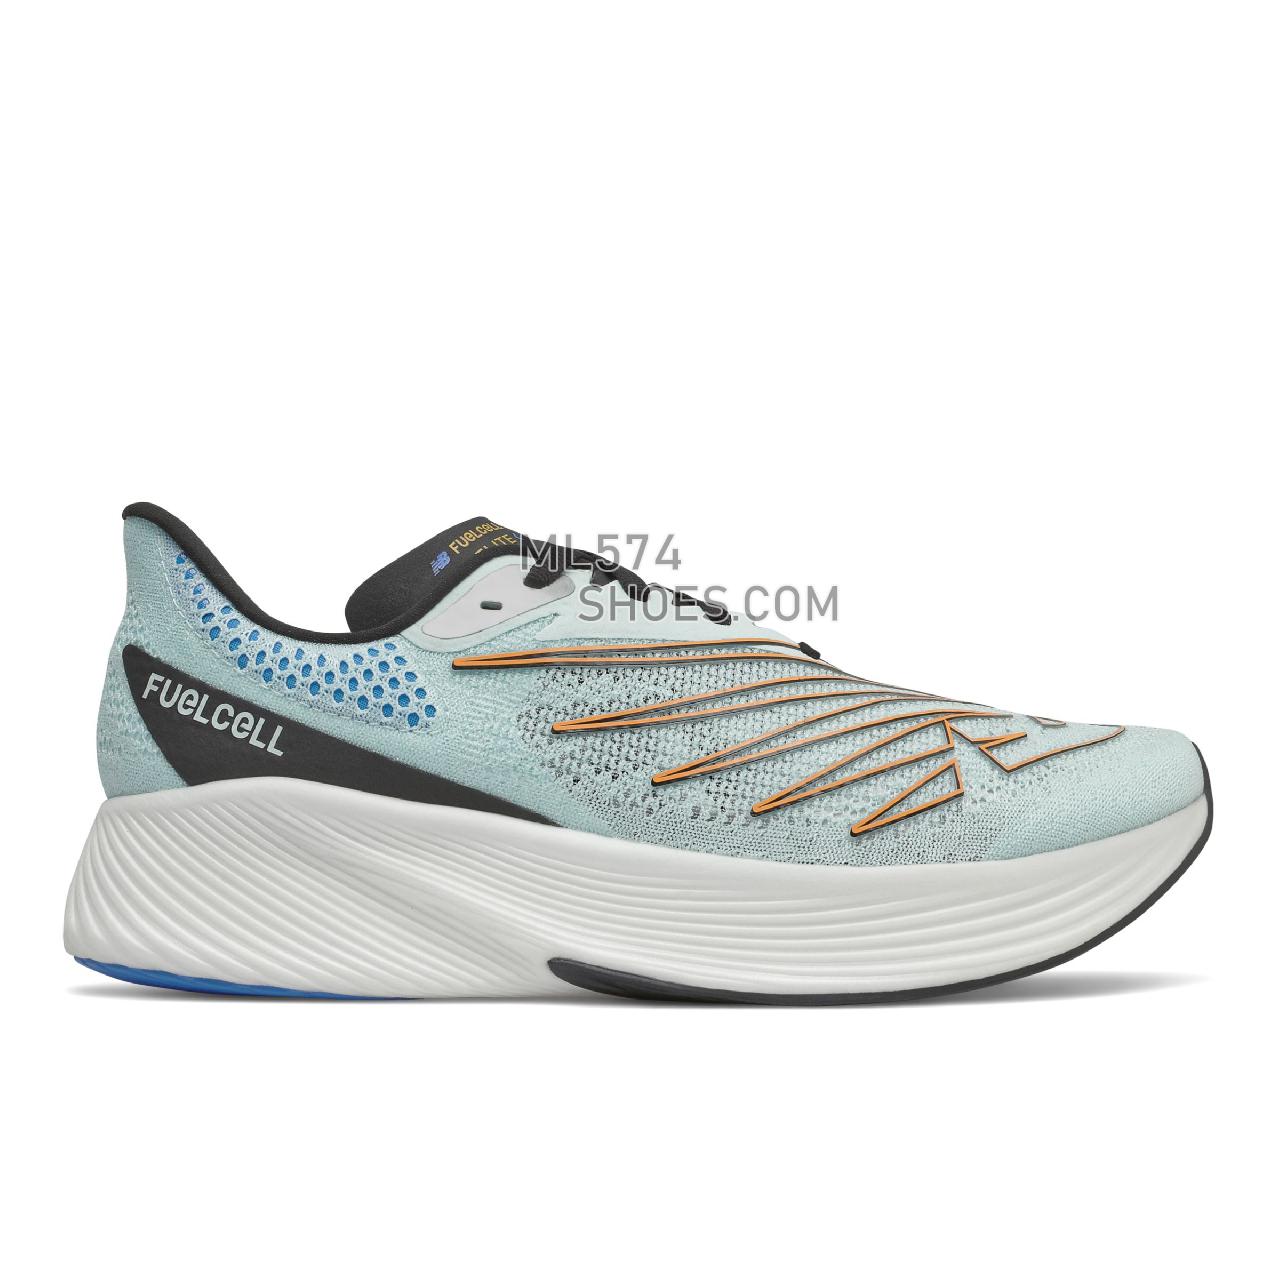 New Balance FuelCell RC Elite v2 - Men's Fuelcell Sleek And LightWeight - Pale Blue Chill with Deep Violet - MRCELSV2